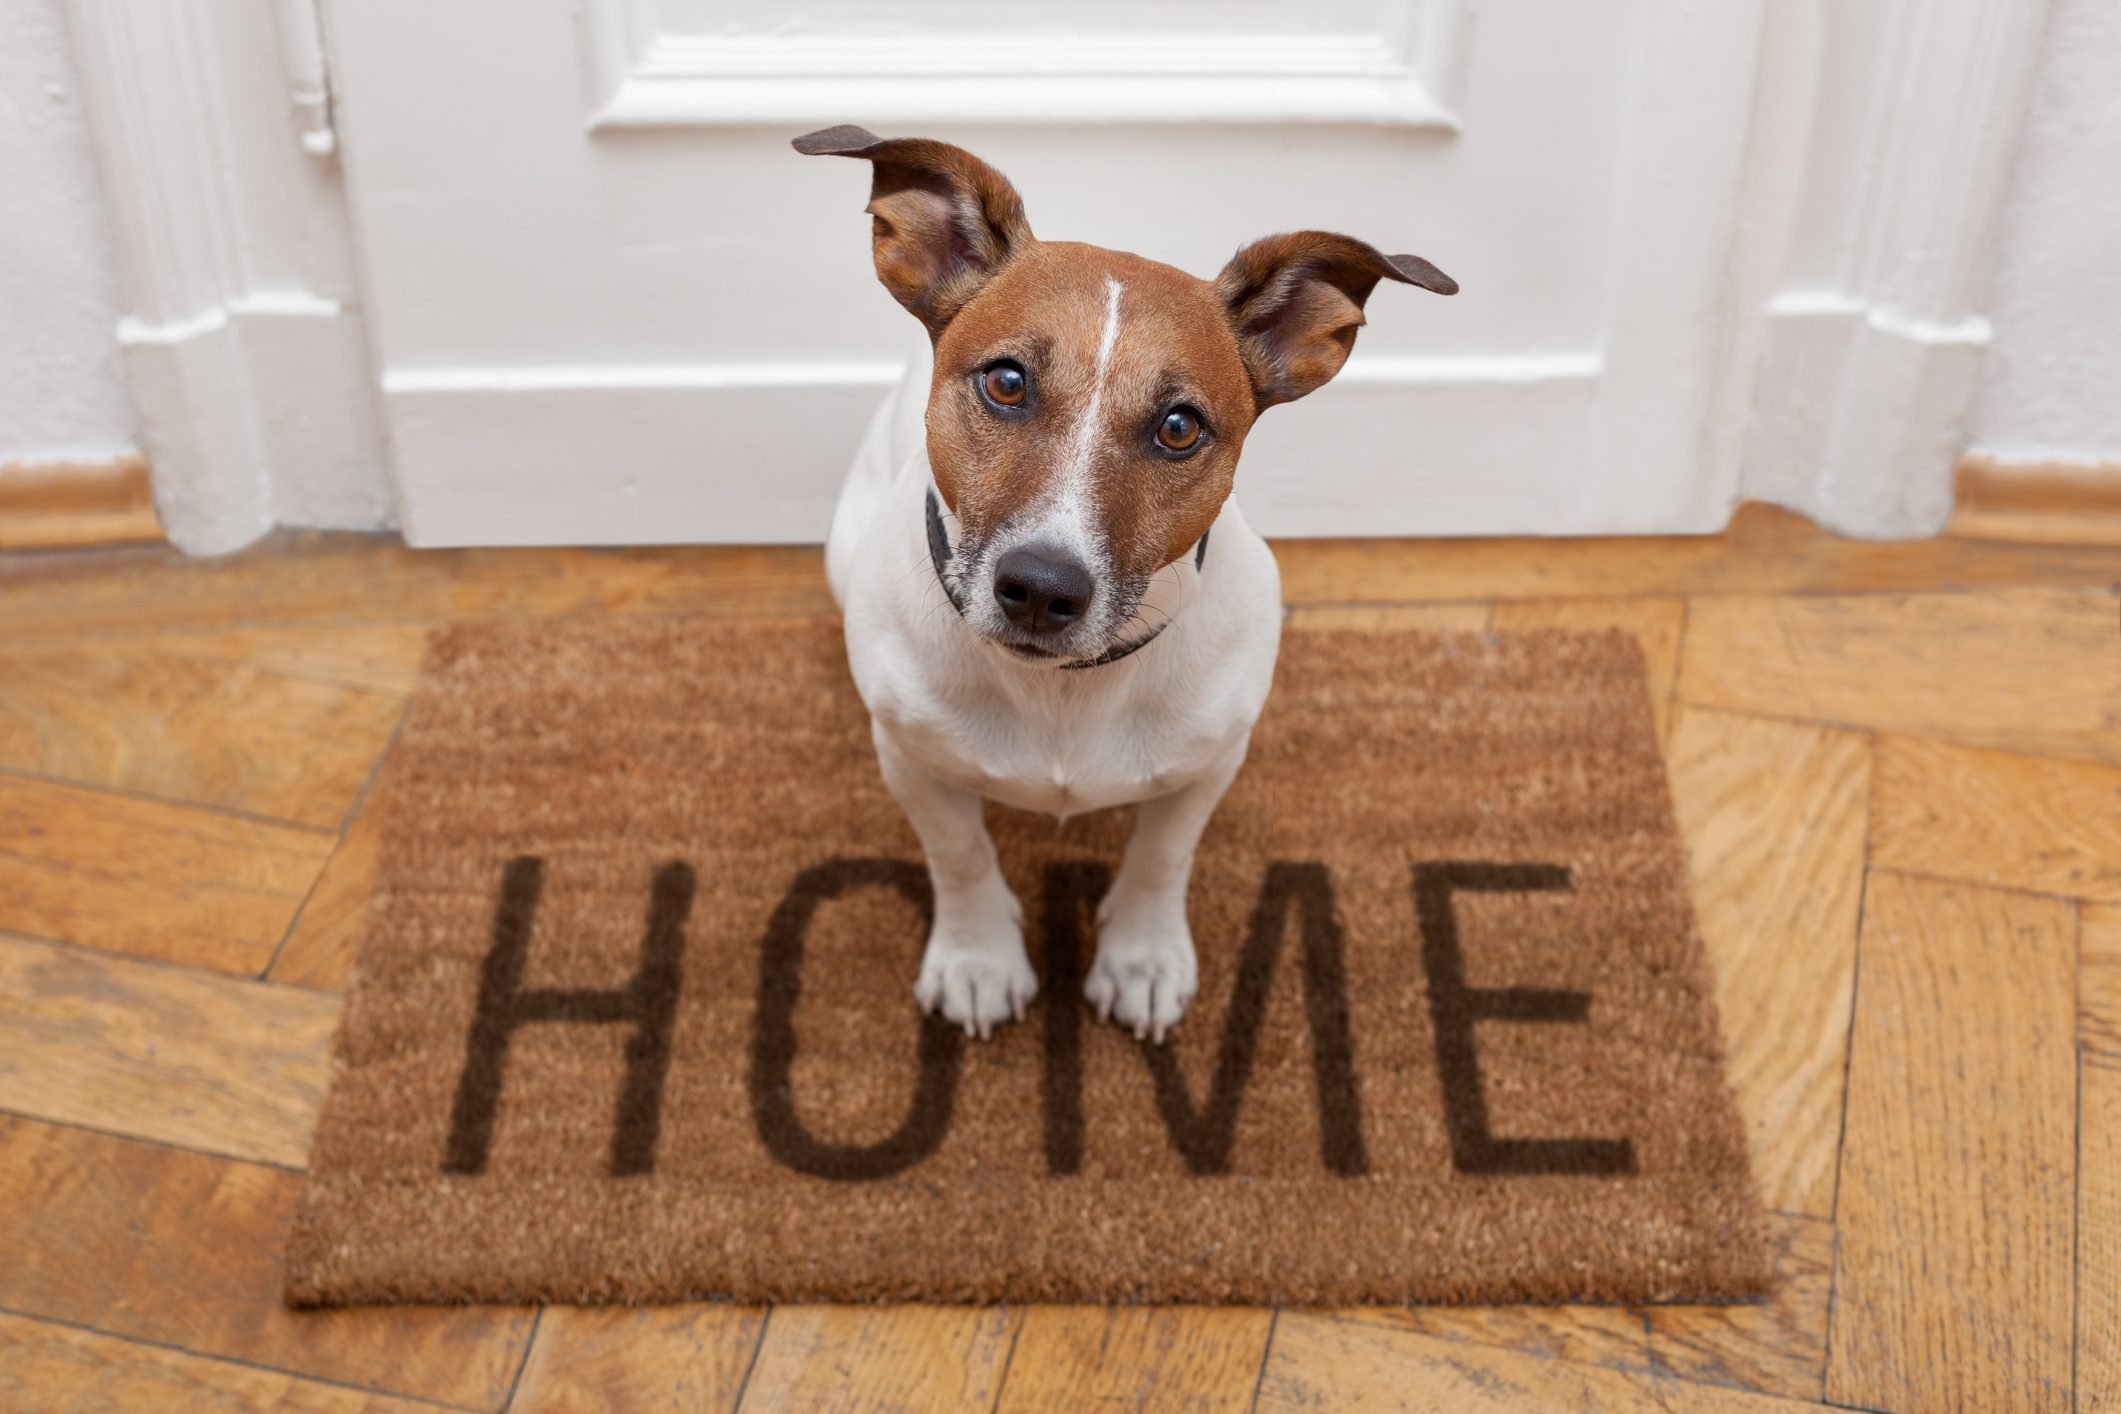 Why Is My Dog Pooping in the House? | The Family Handyman